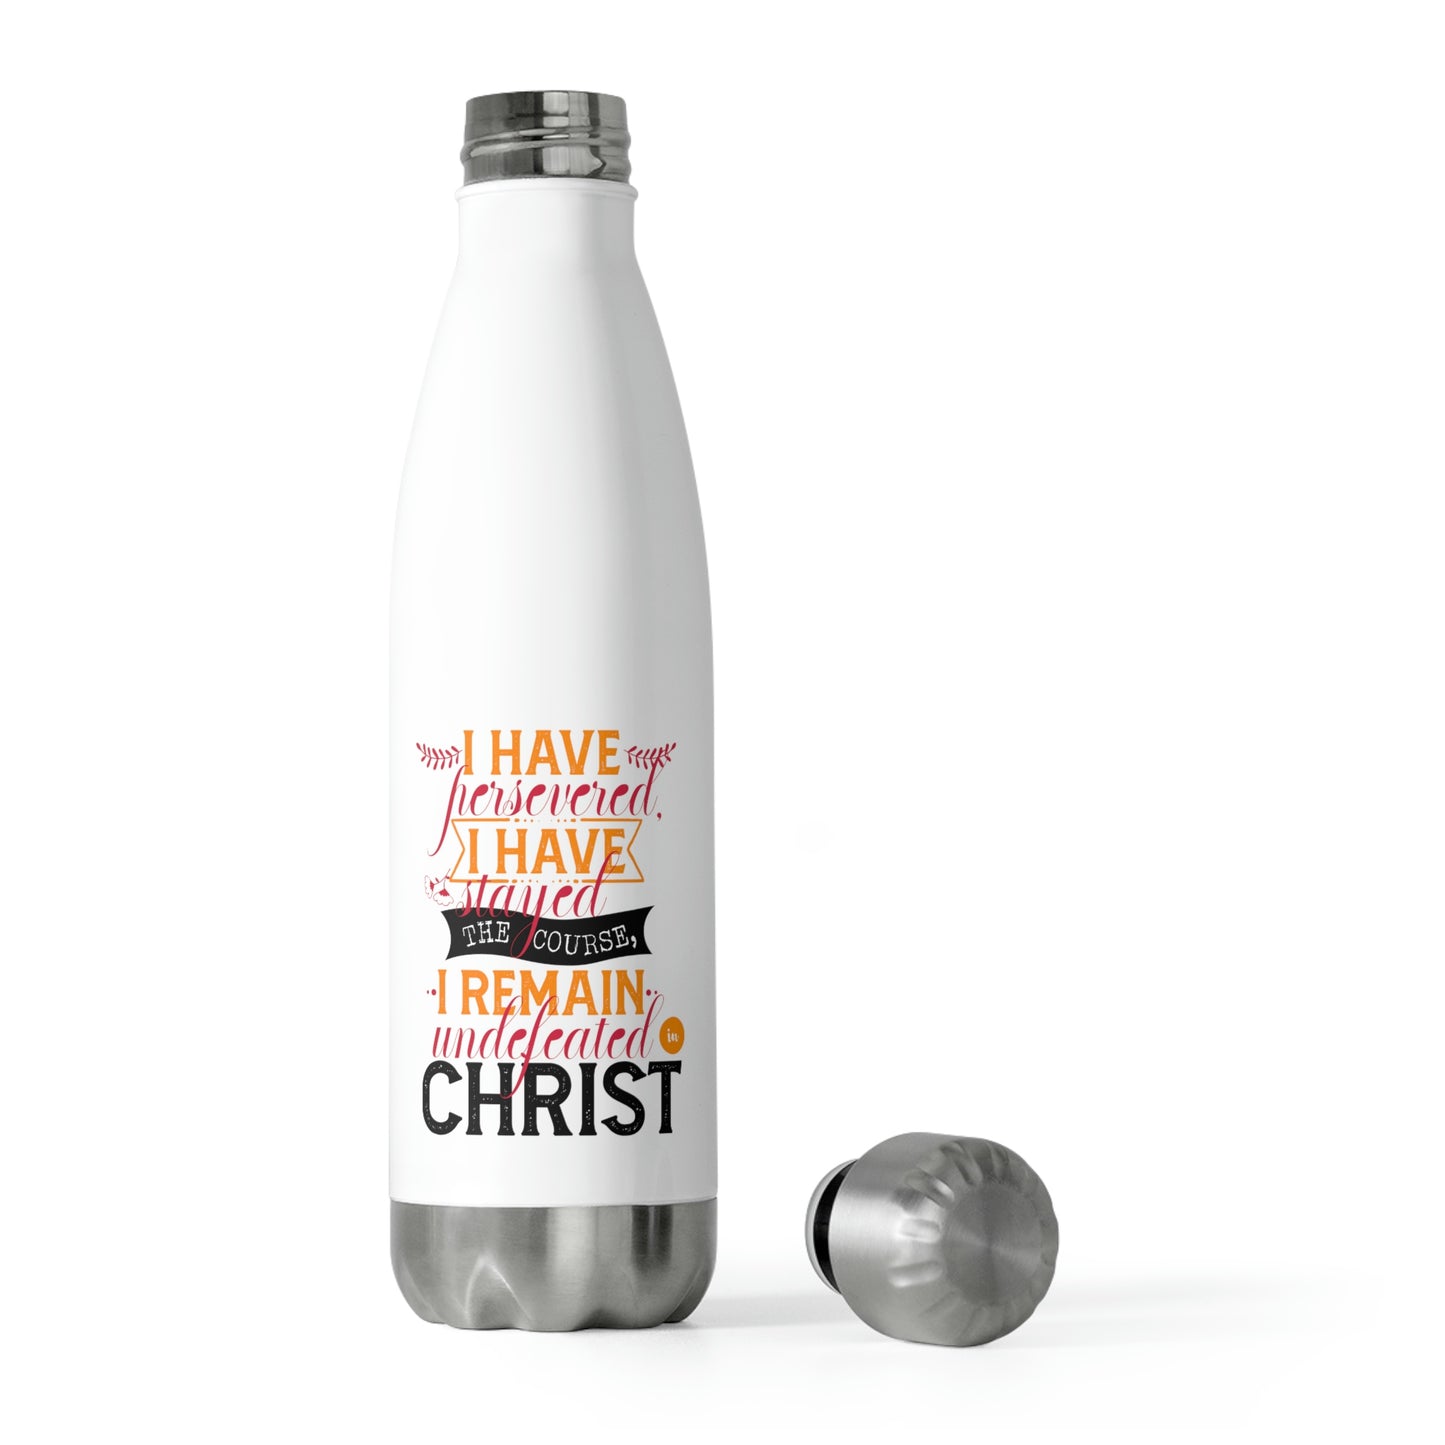 I Have Persevered I Have Stayed The Course I Remain Undefeated In Christ Insulated Bottle